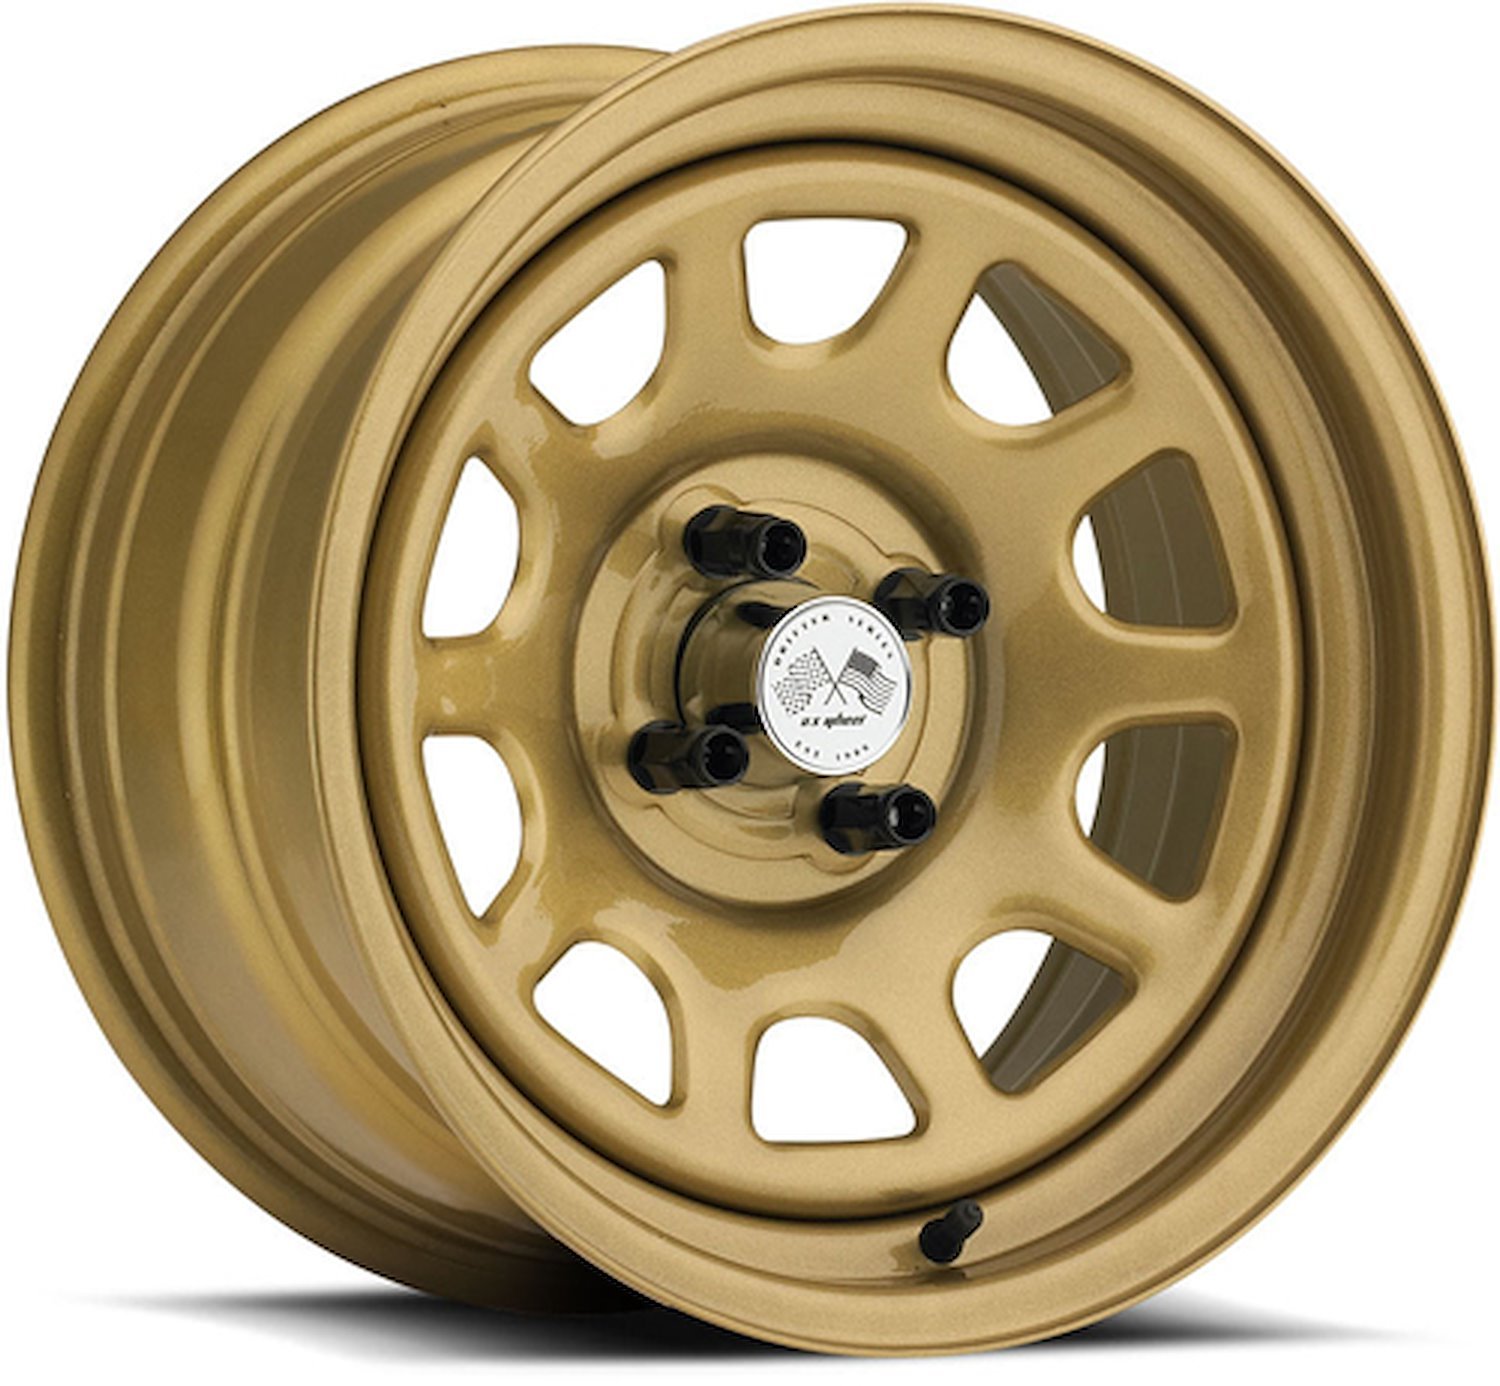 PAINTED DAYTONA FWD DRIFTER GOLD 15 x 10 4 x 45 Bolt Circle 5 12 Back Spacing 0 offset 266 Center Bore 1400 lbs Load Rating